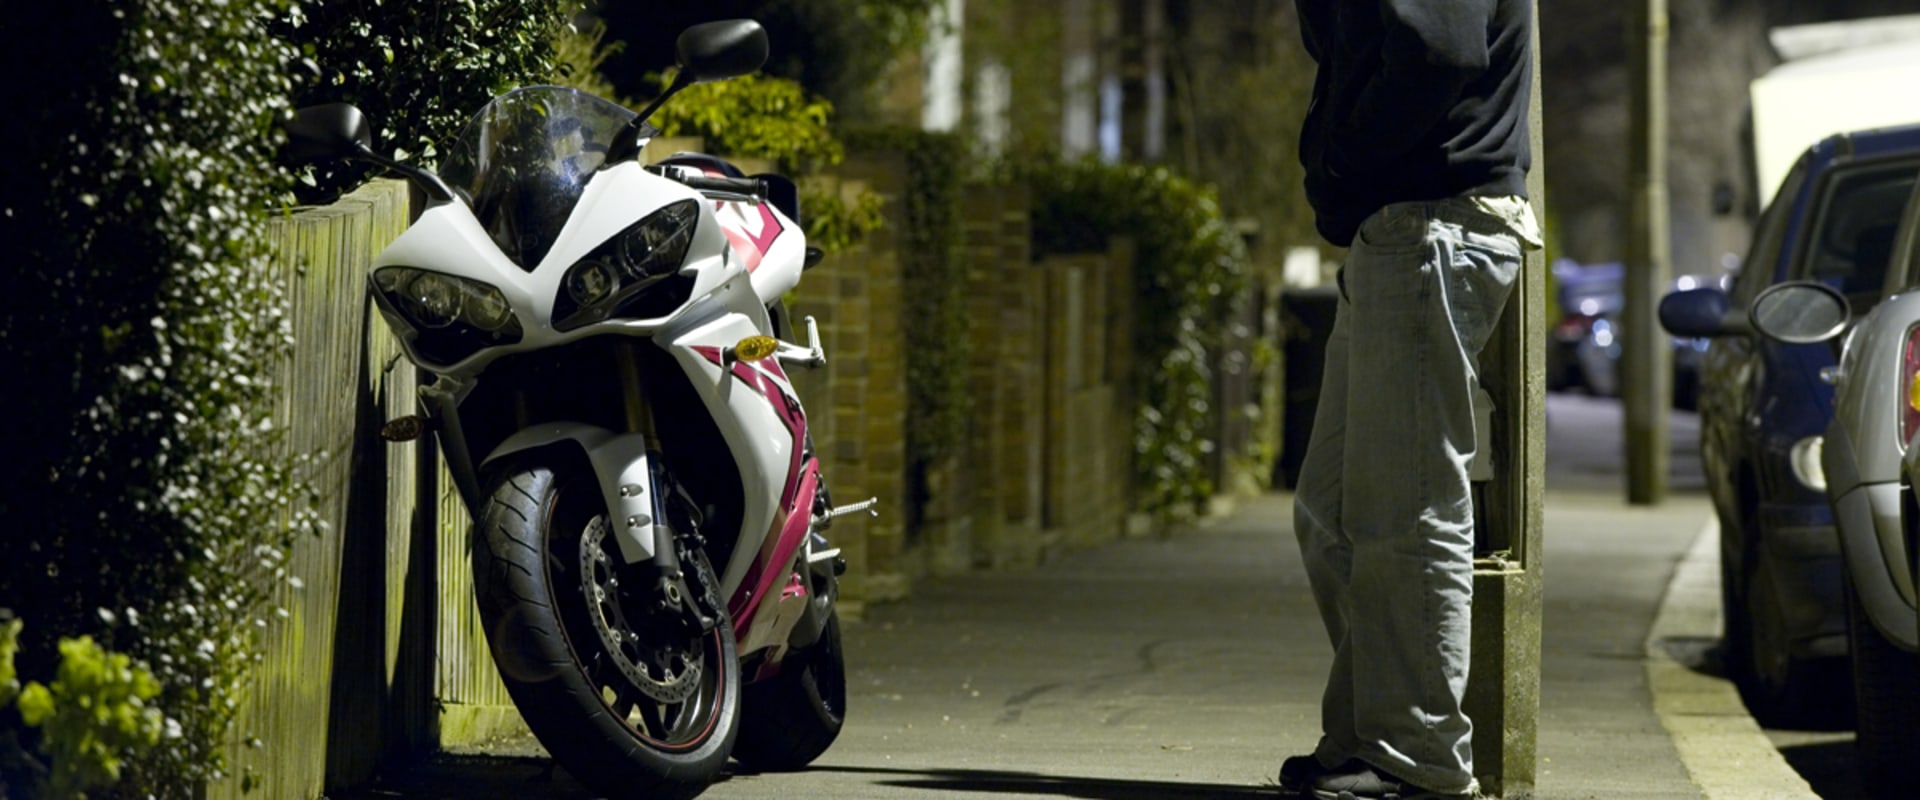 Theft Insurance for Street Motorcycles